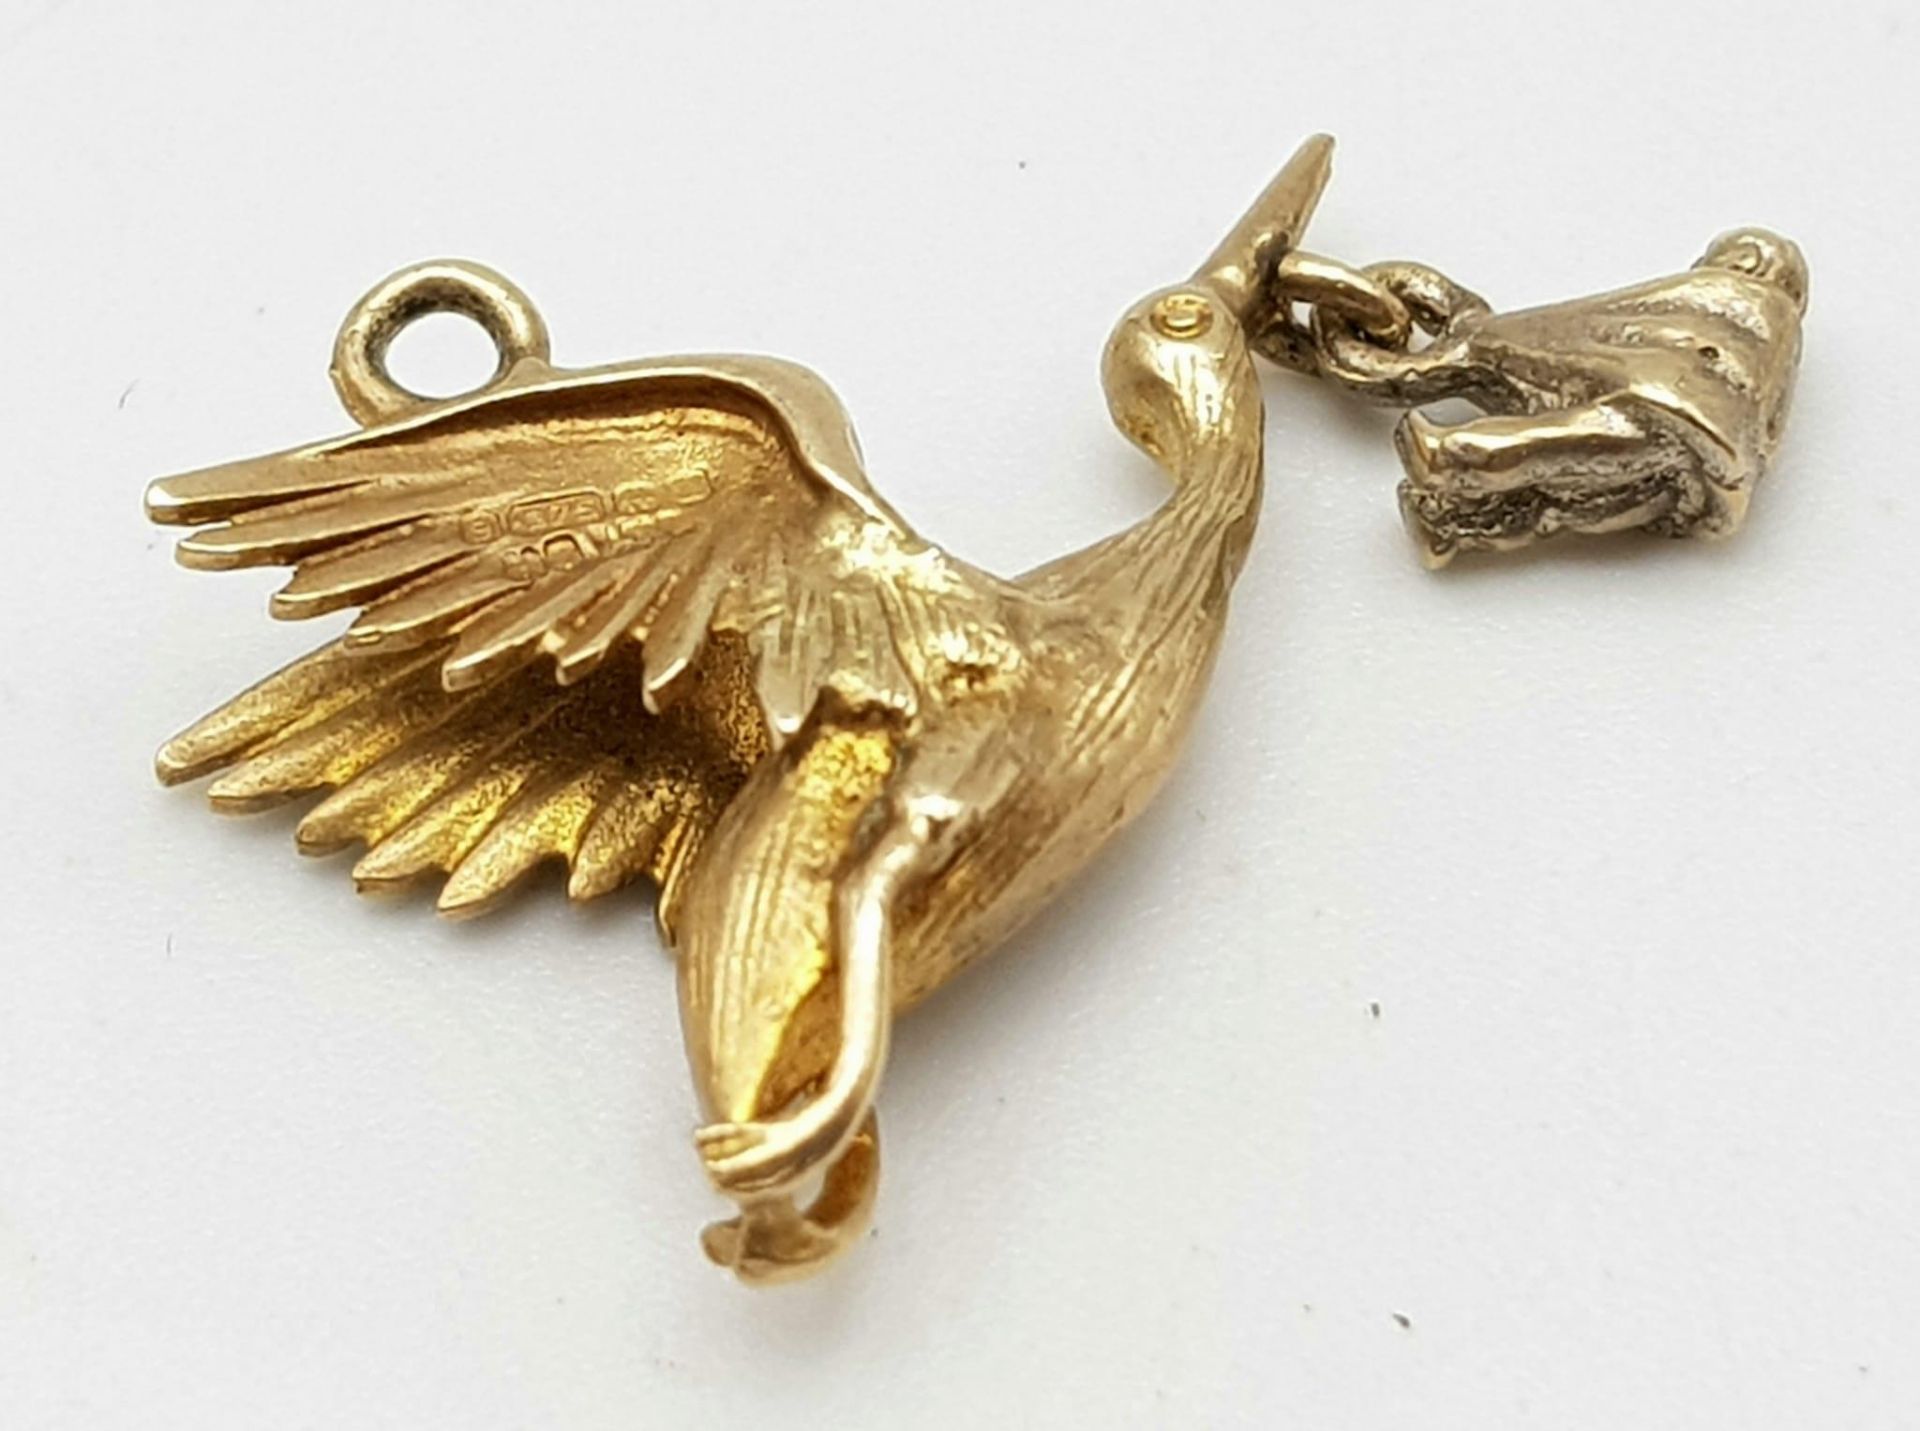 A 9K Yellow Gold Stork and Baby Pendant/Charm. 25mm. 2.35g weight. - Image 2 of 4